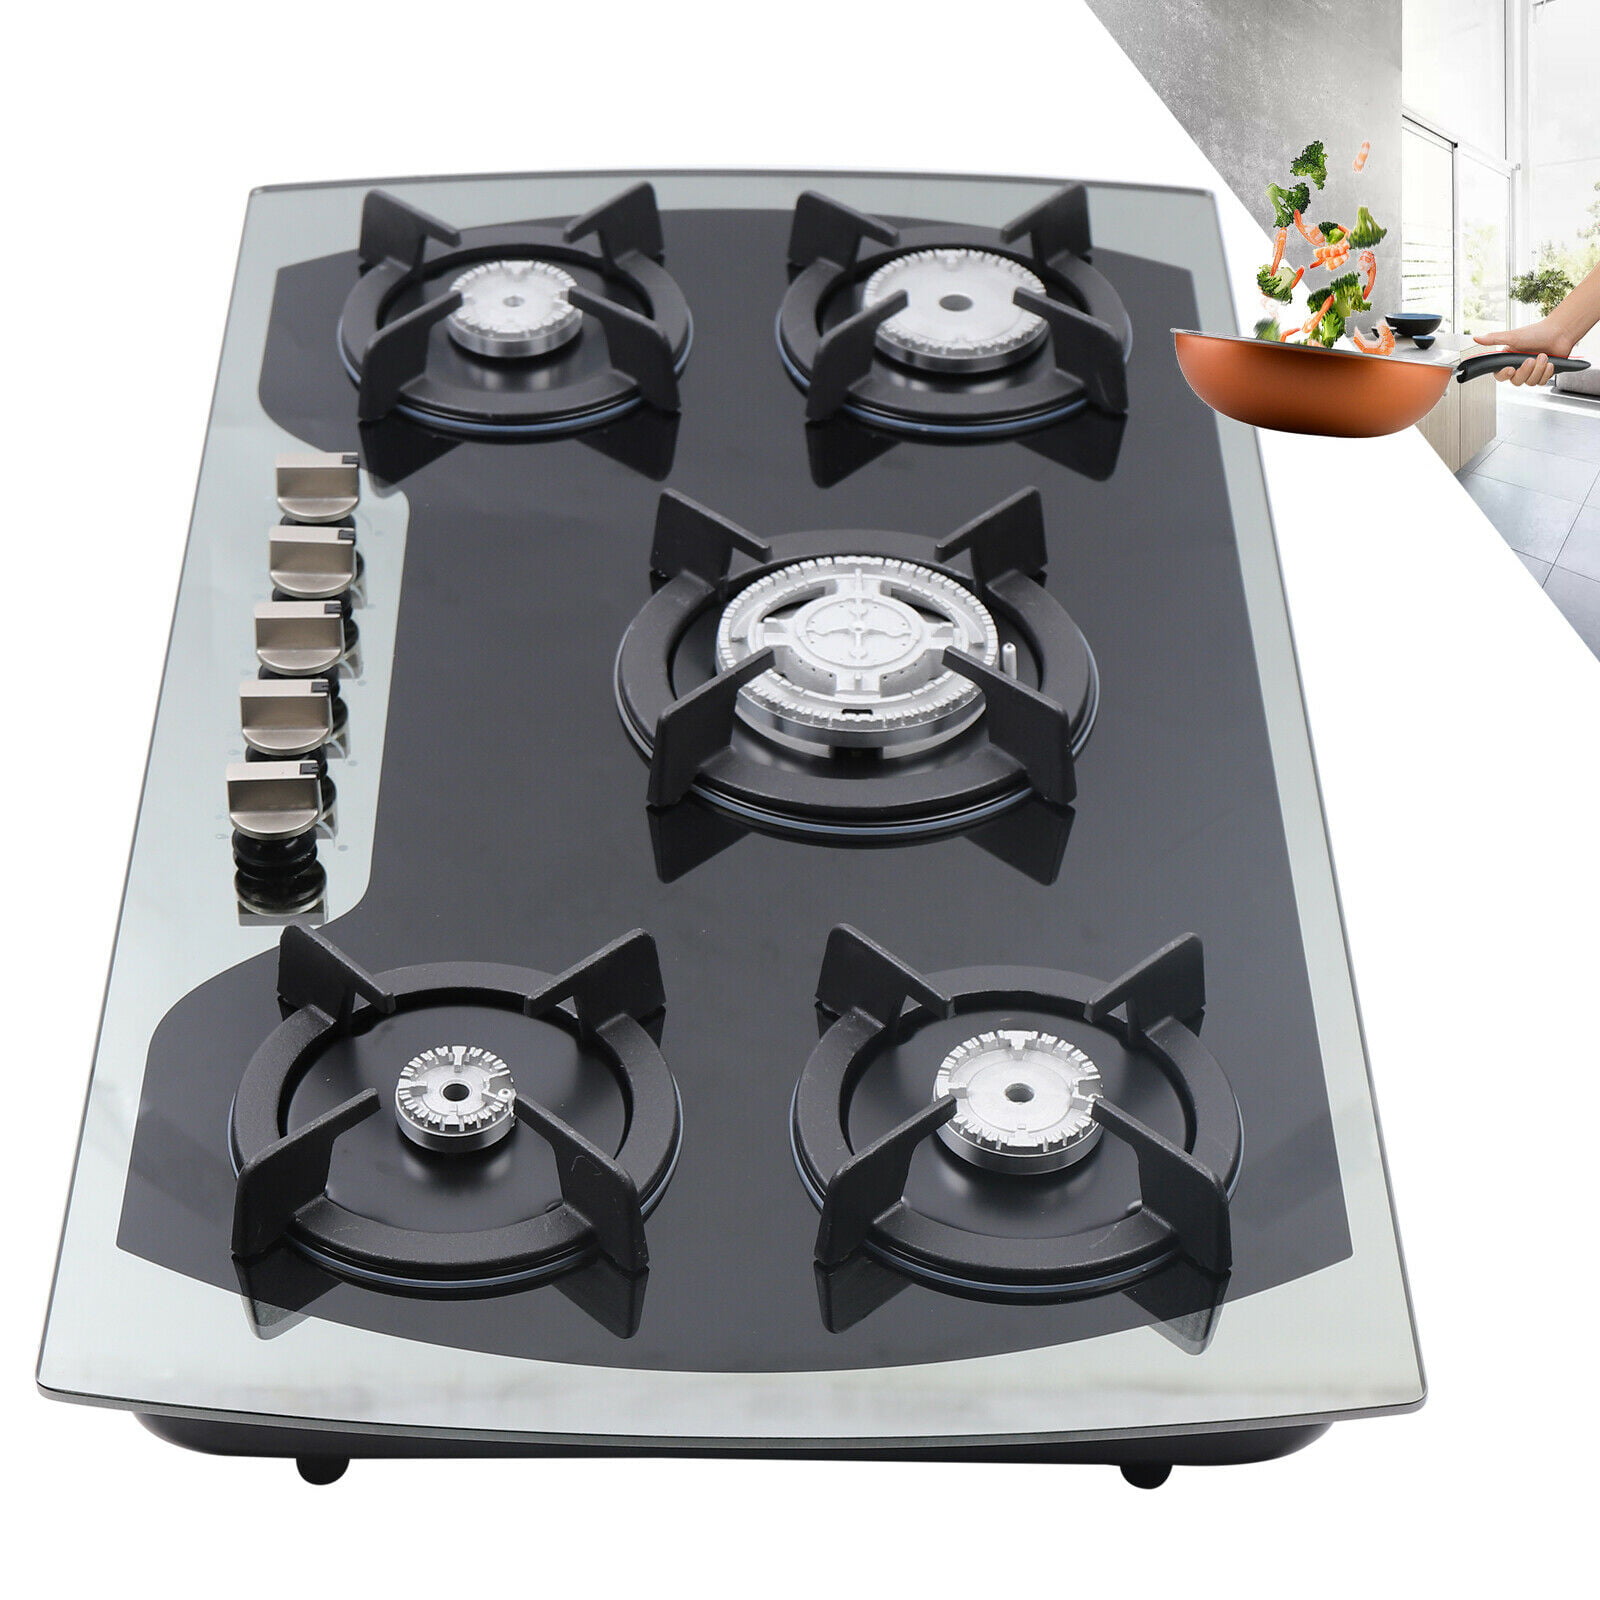 Fichiouy Gas Cooktop Stove Top 2-Burner Built-In Natural Gas Stove Tempered  Glass Kitchen